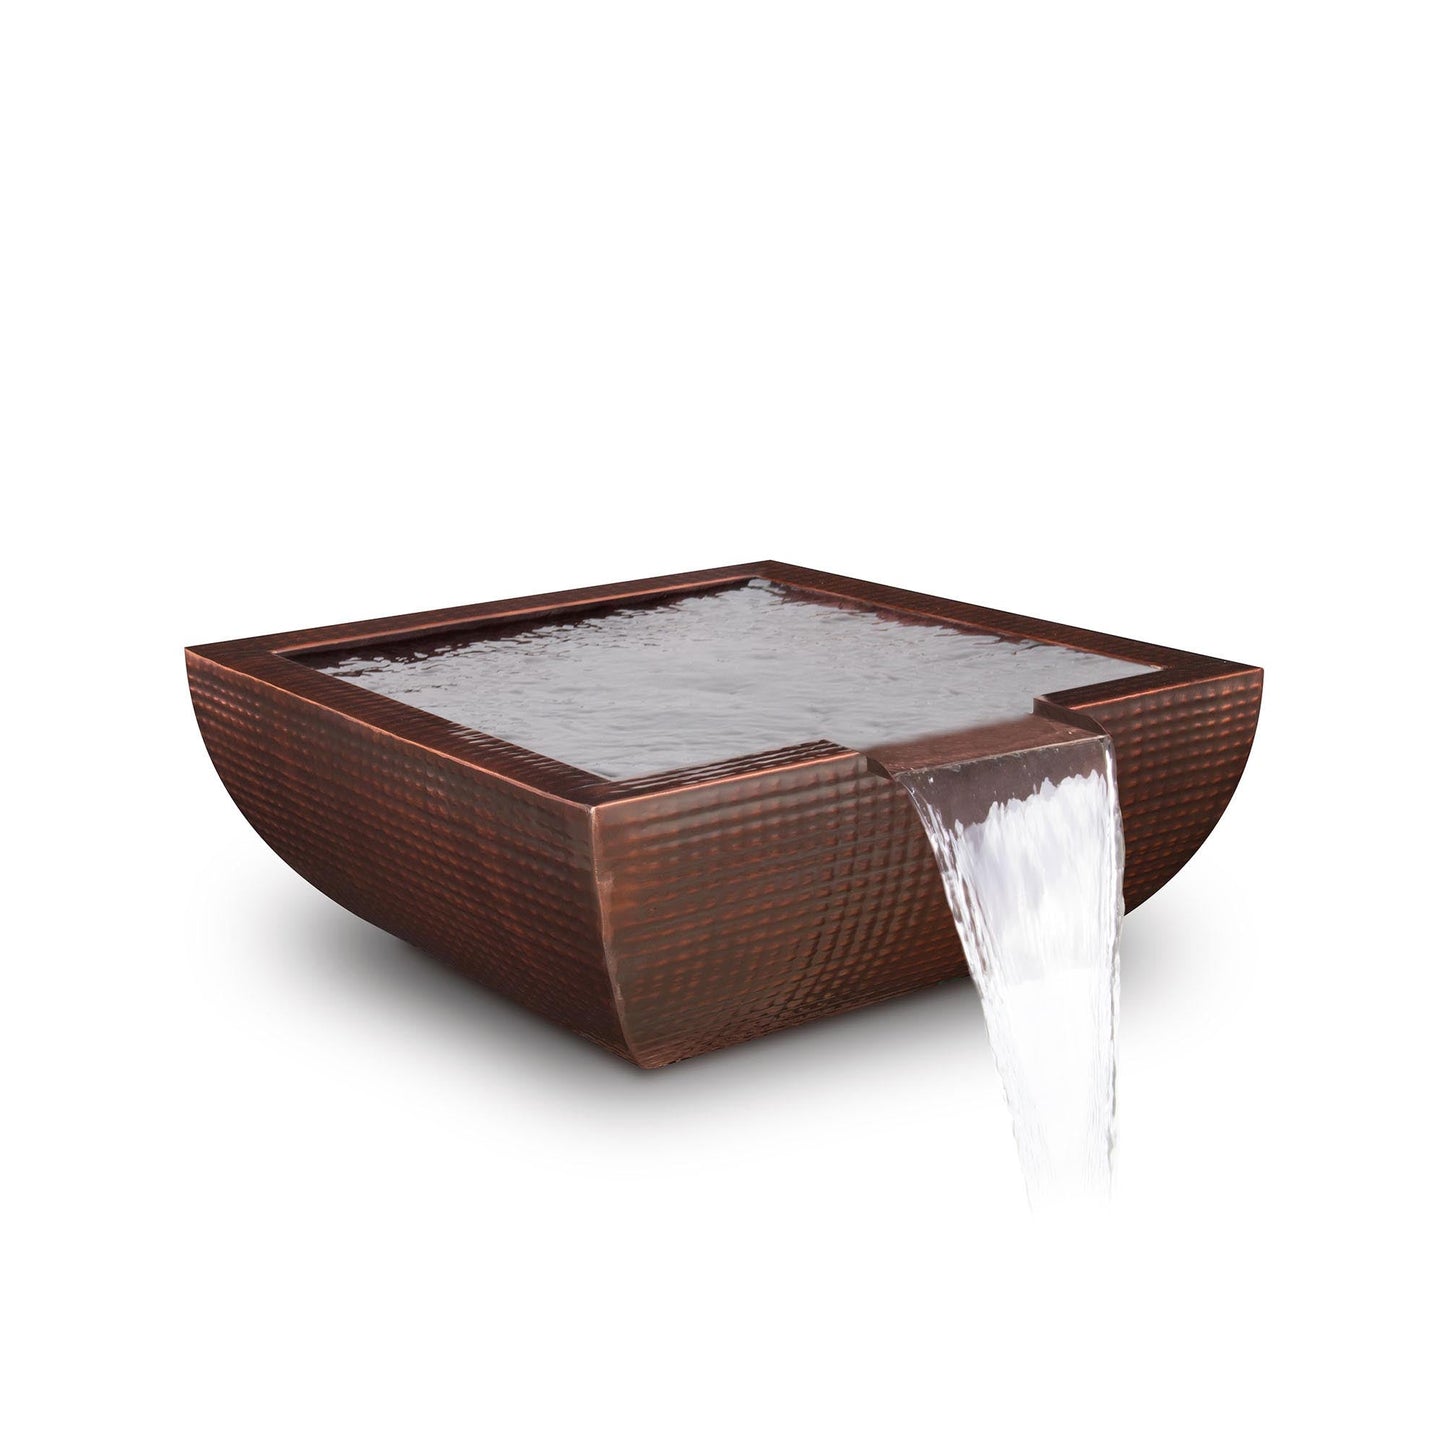 The Outdoor Plus Square Avalon 30" Pewter Powder Coated Water Bowl